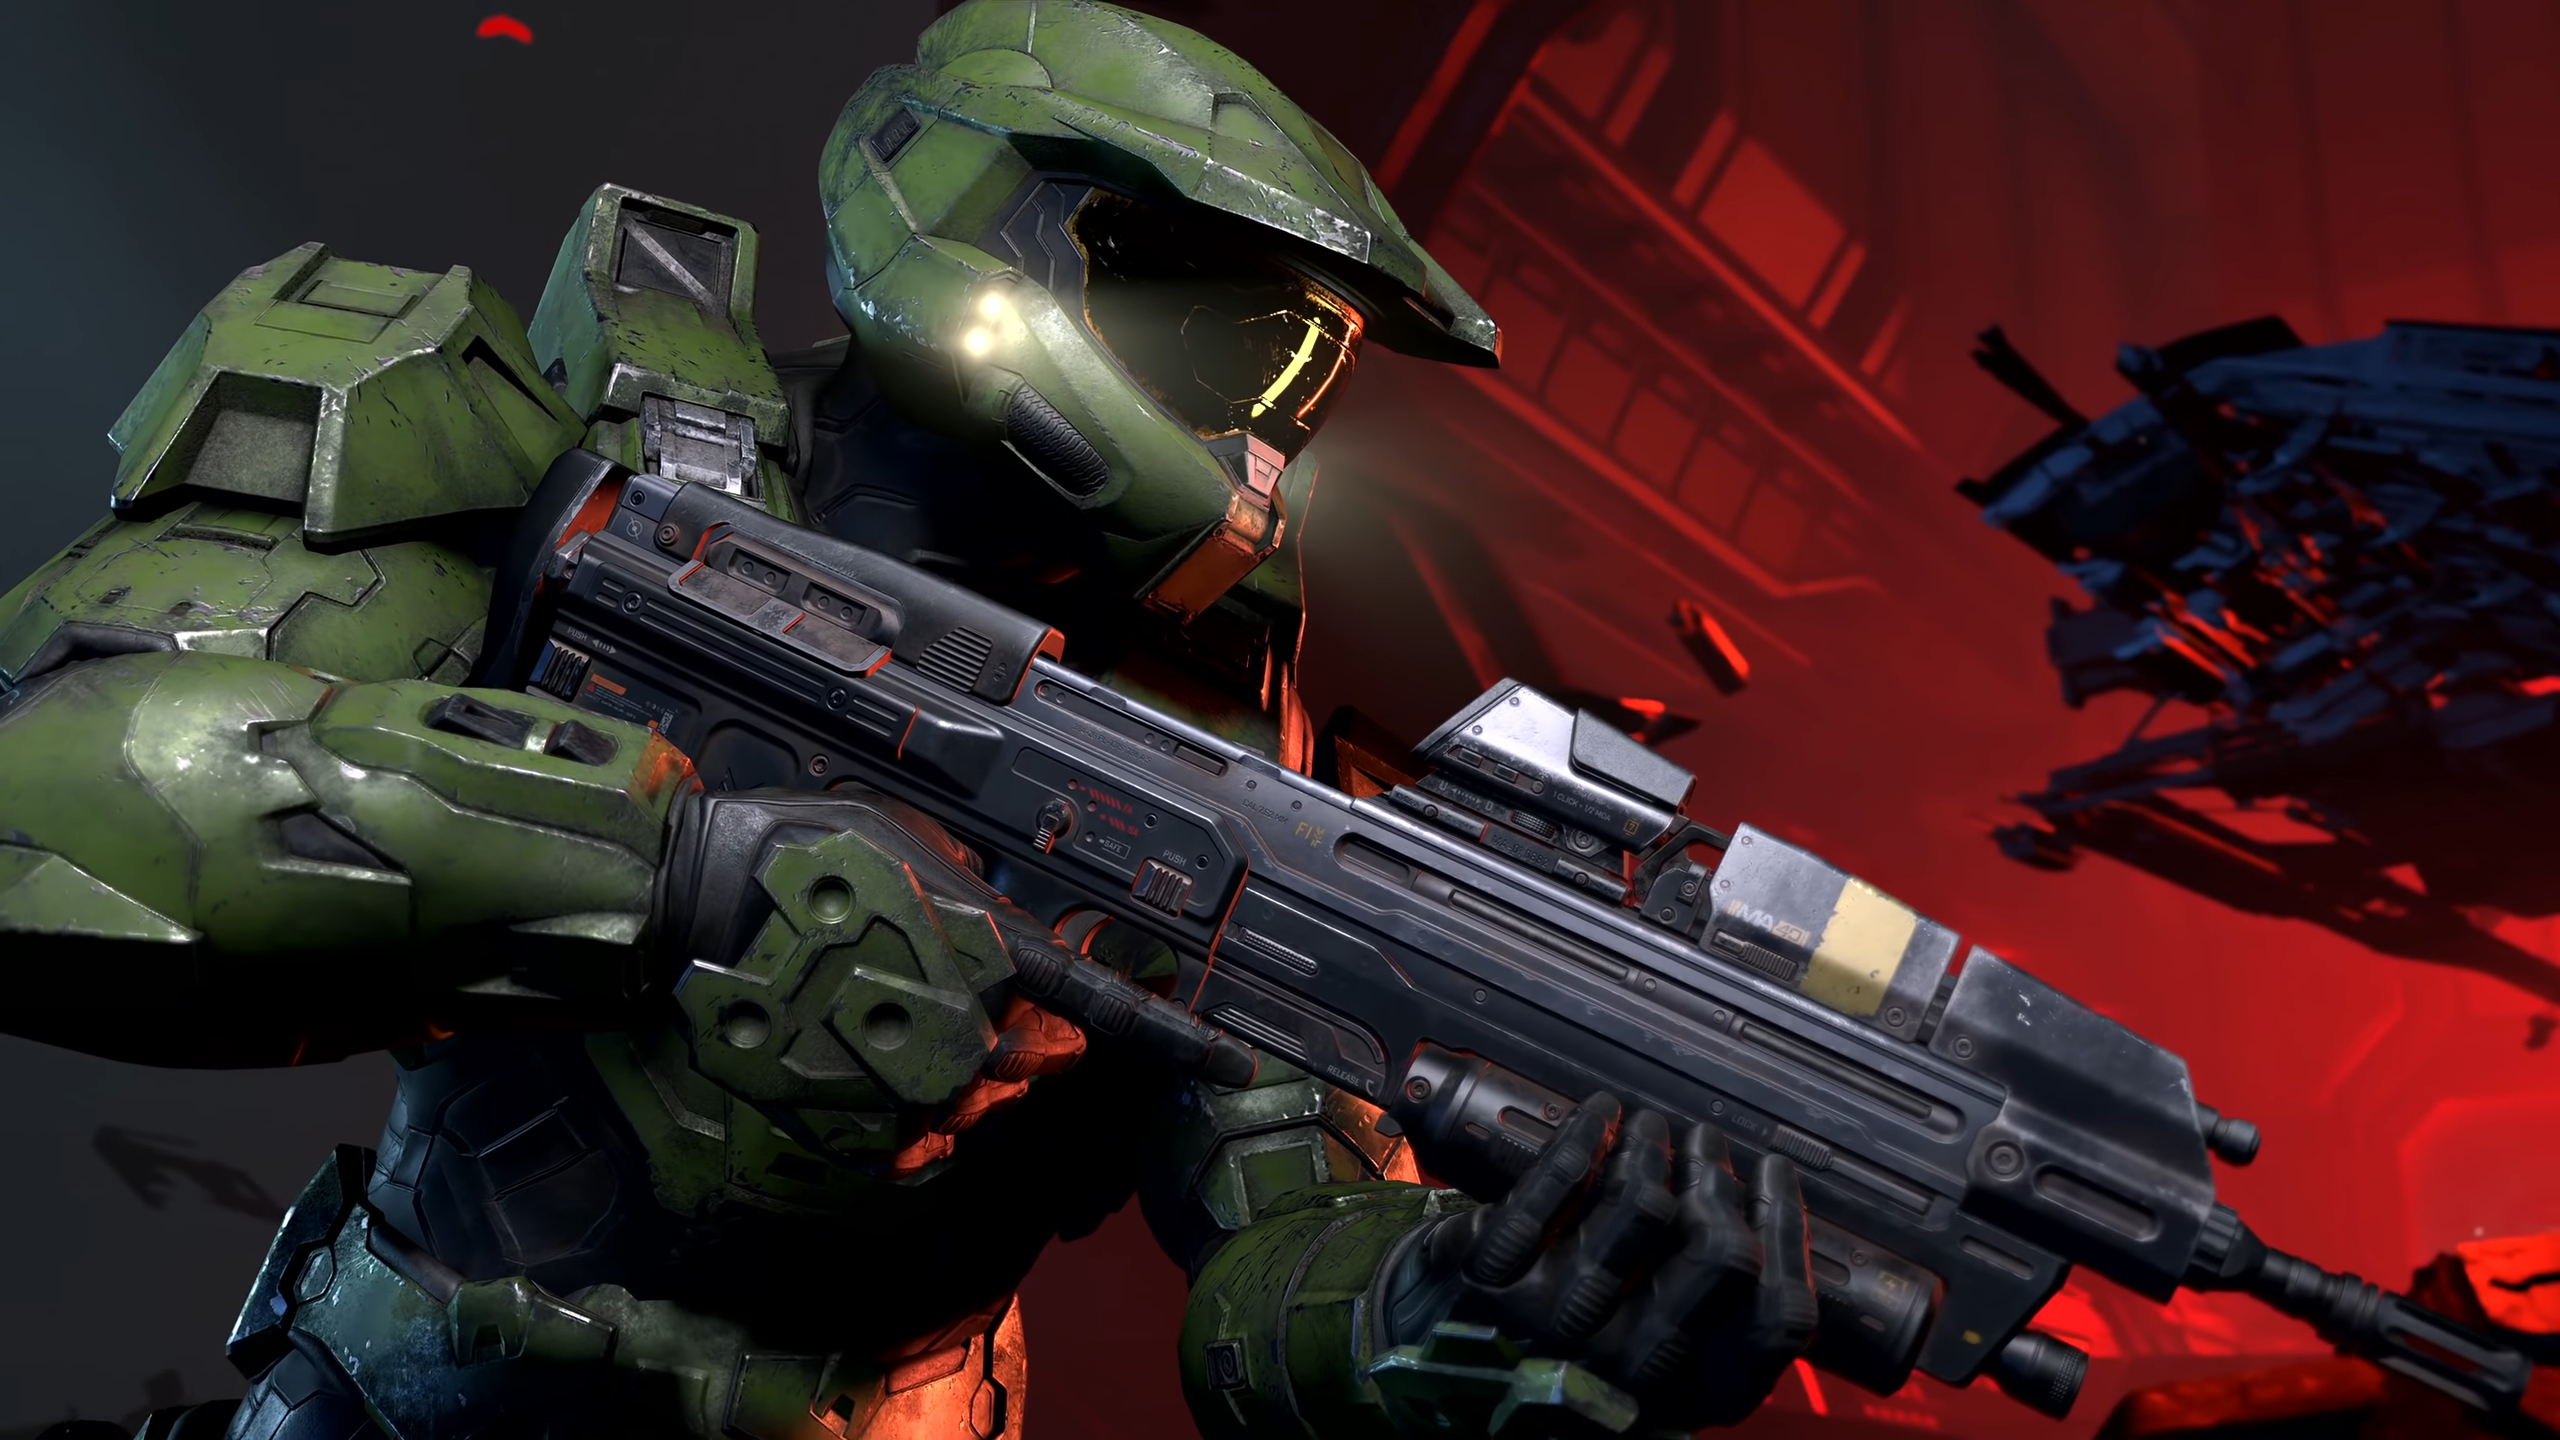 The best Halo games, ranked from best to worst